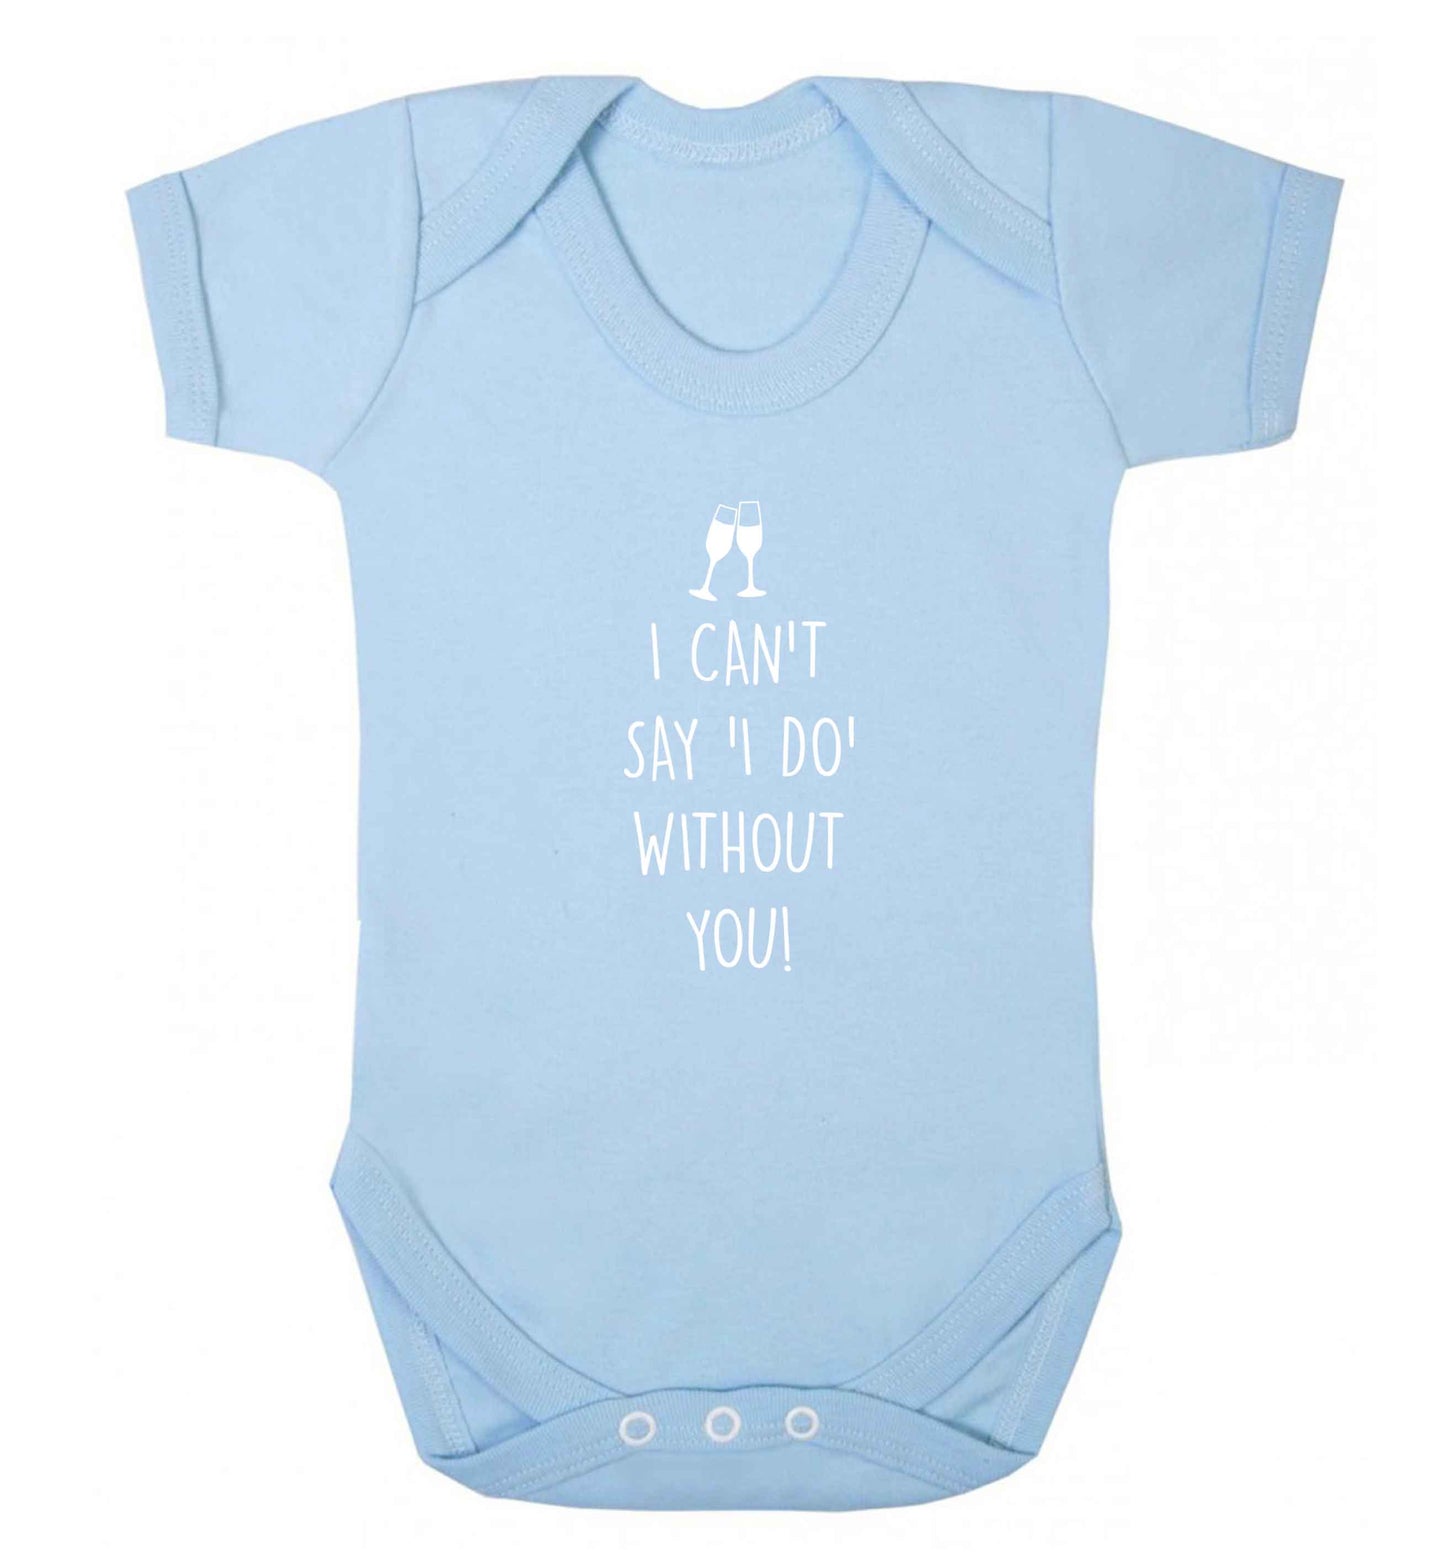 I can't say 'I do' without you! baby vest pale blue 18-24 months